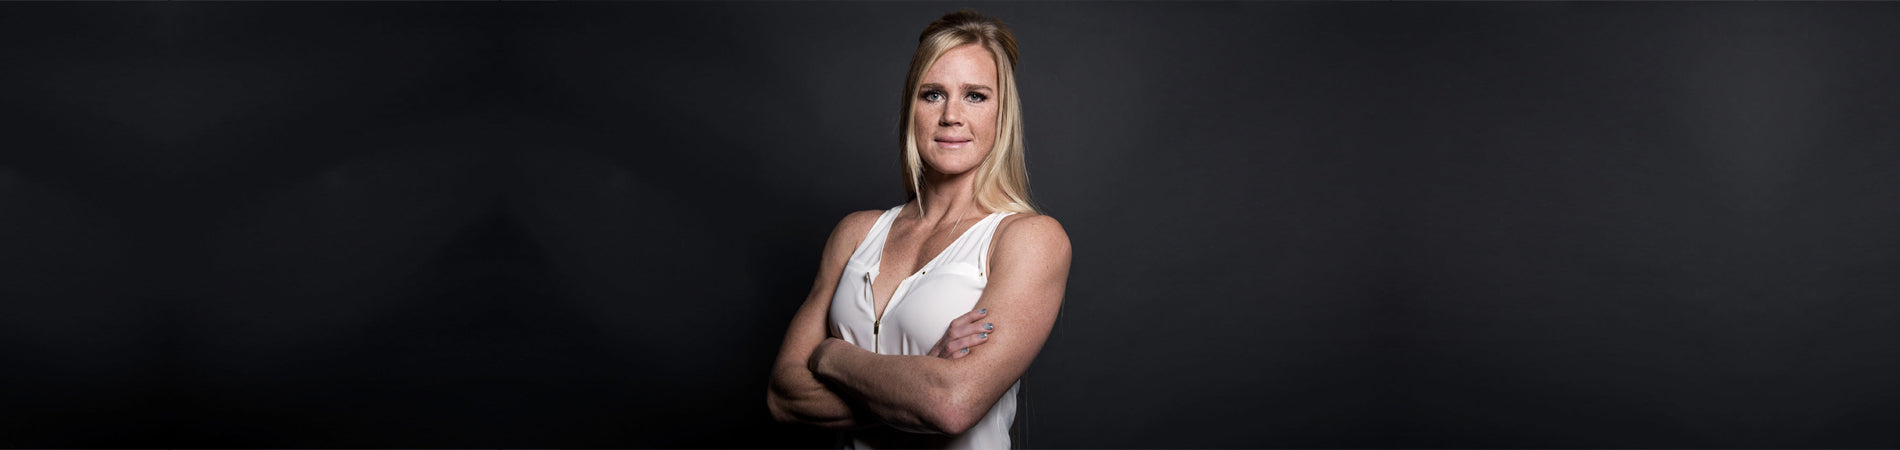 Holly Holm Designated as an International Boxing Hall of Fame Inductee for 2022